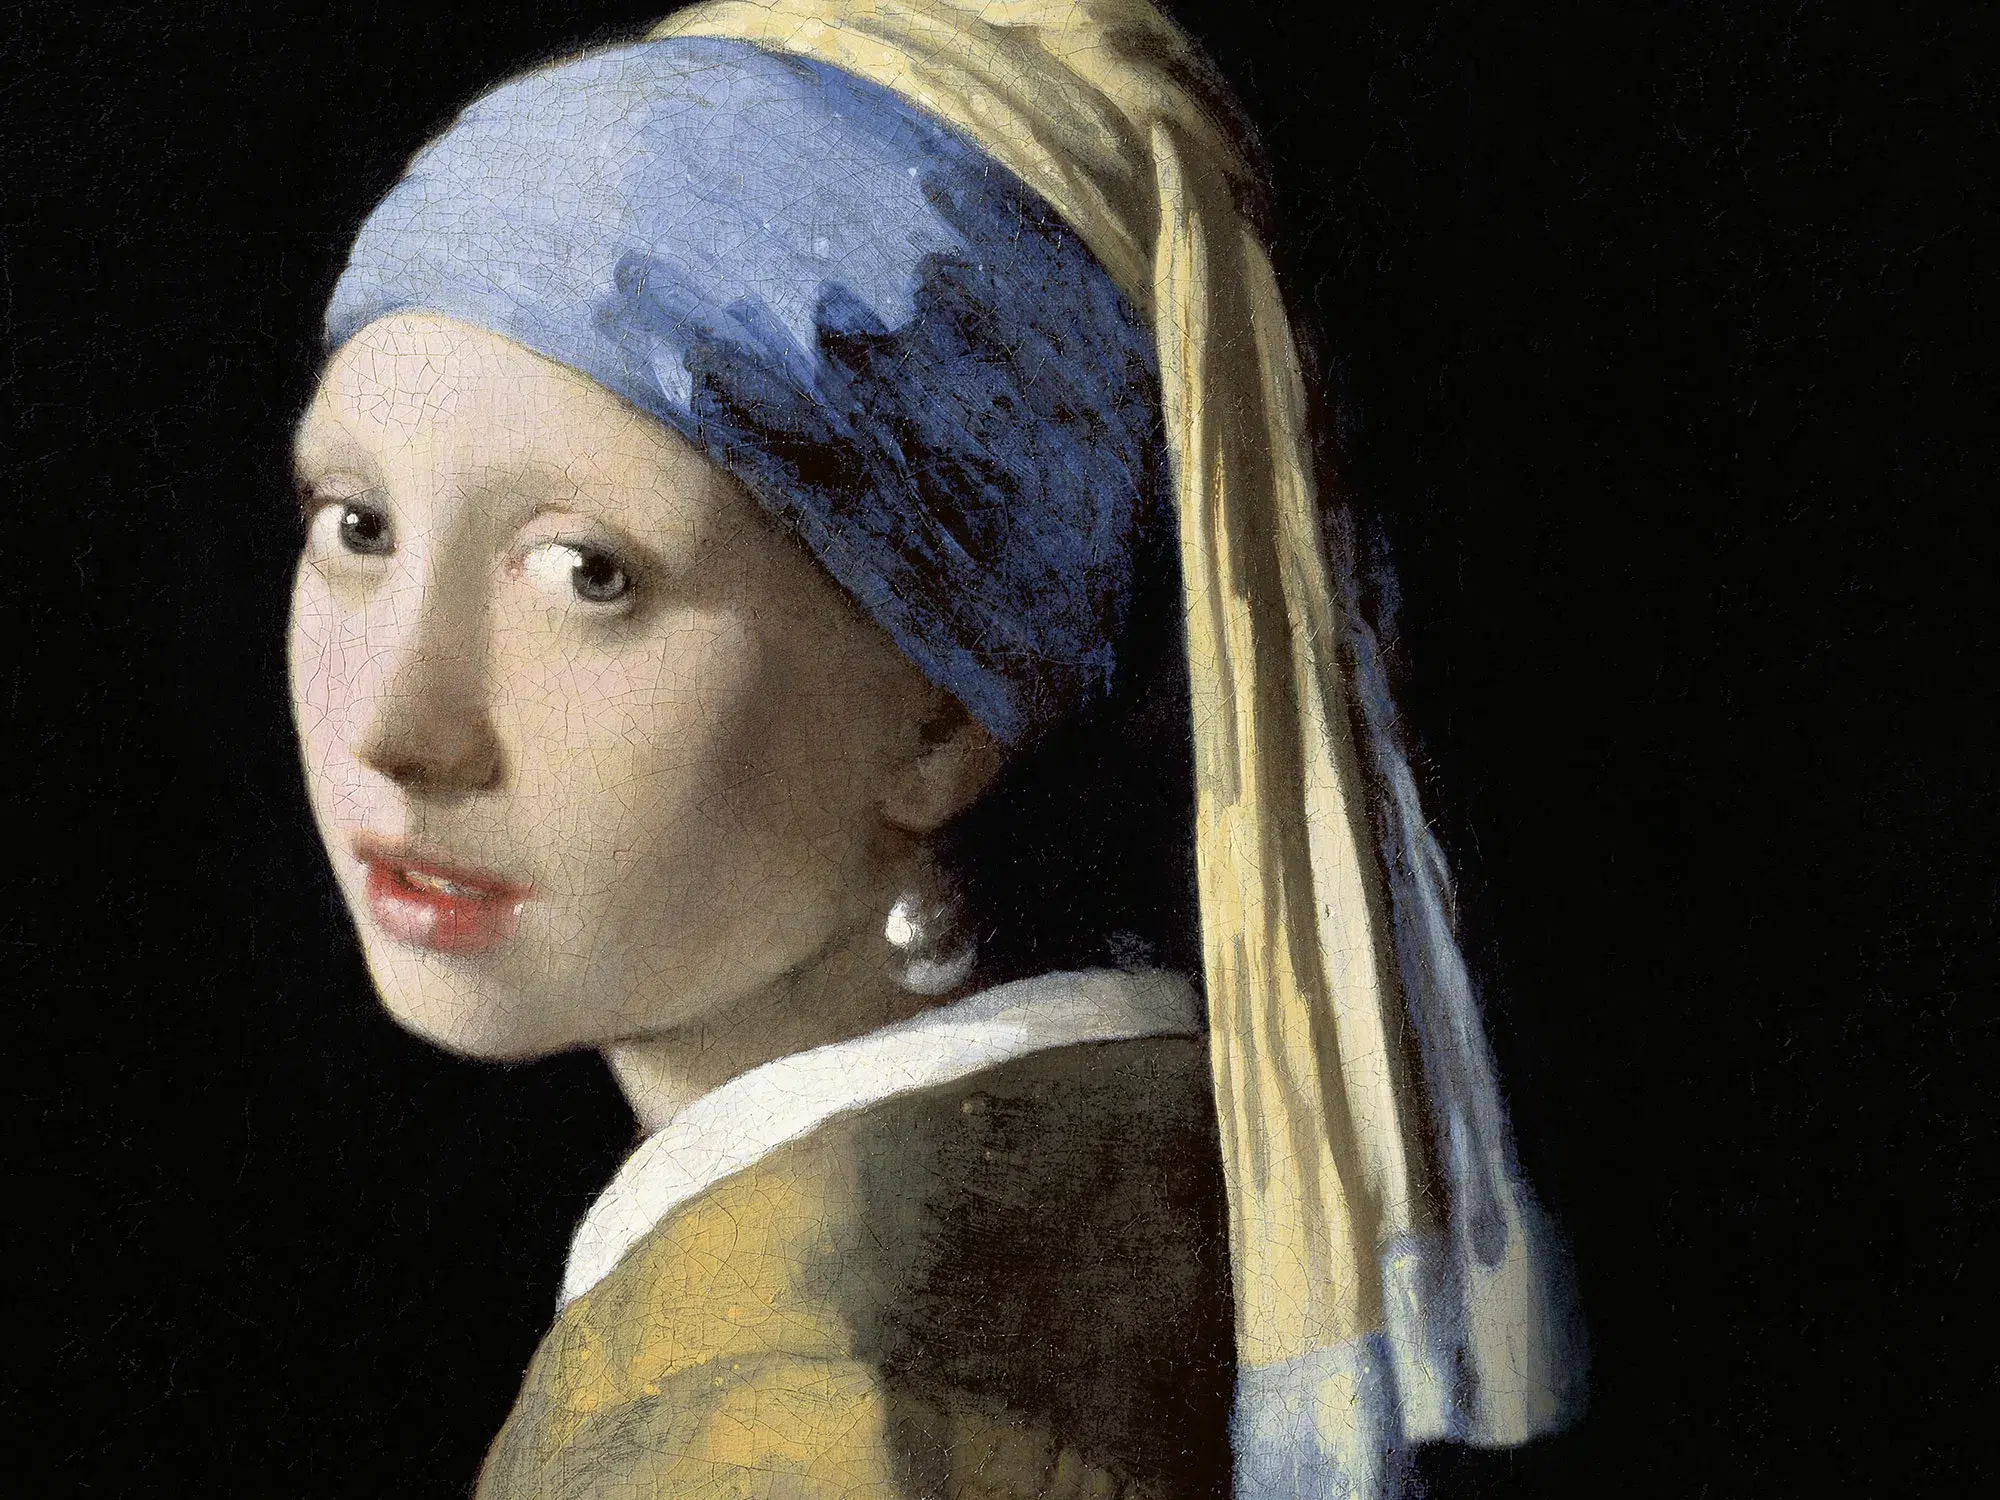 Vermeer exhibition continues to smash audience records – in UK cinemas!